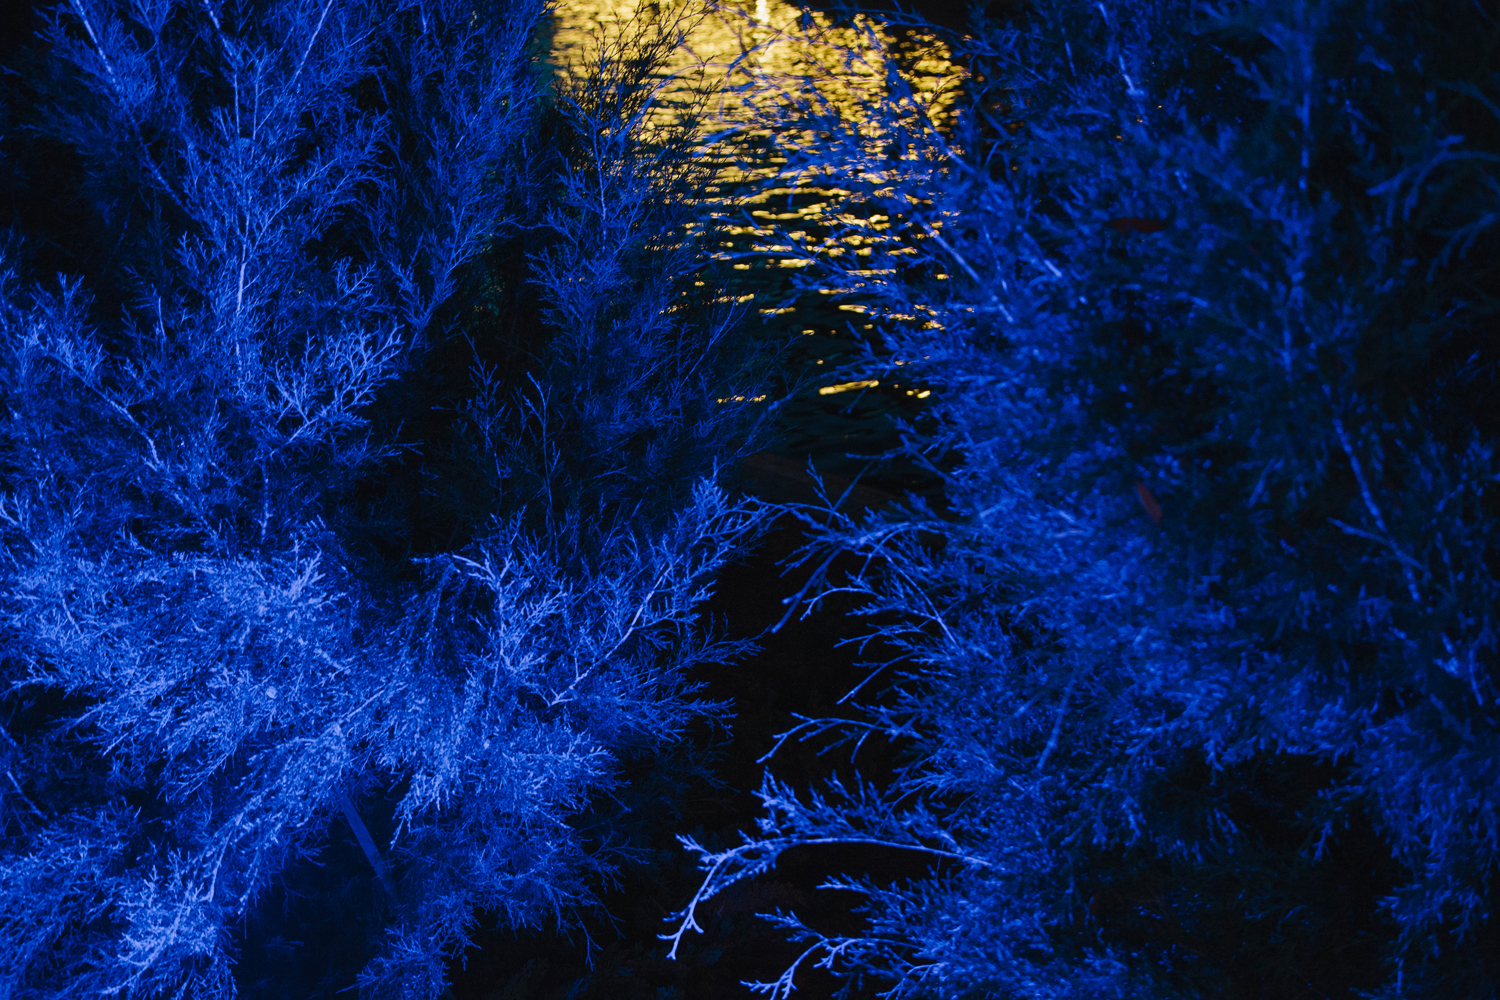 Off the Path at Night, Orlando, FL, 2012, from the project, 'Florida: Eden Isle'.